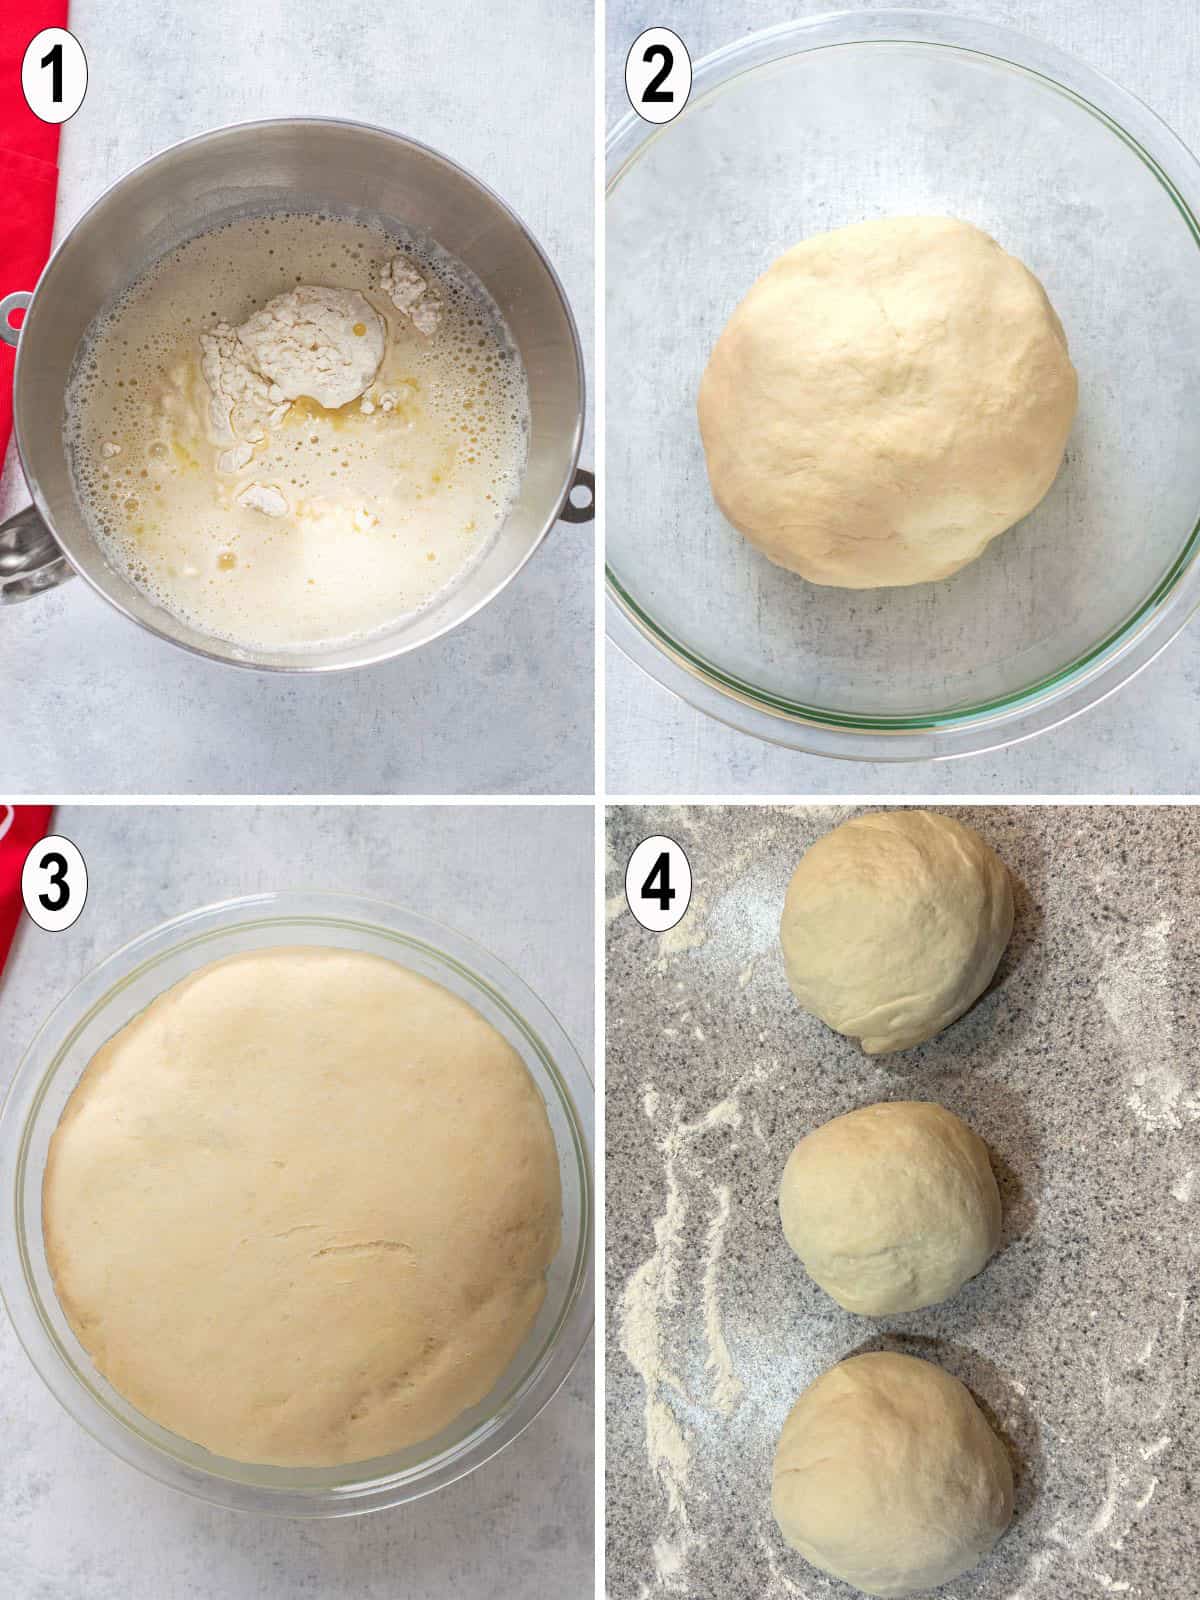 dough ingredients mixed to form ball of dough. risen and divided into three